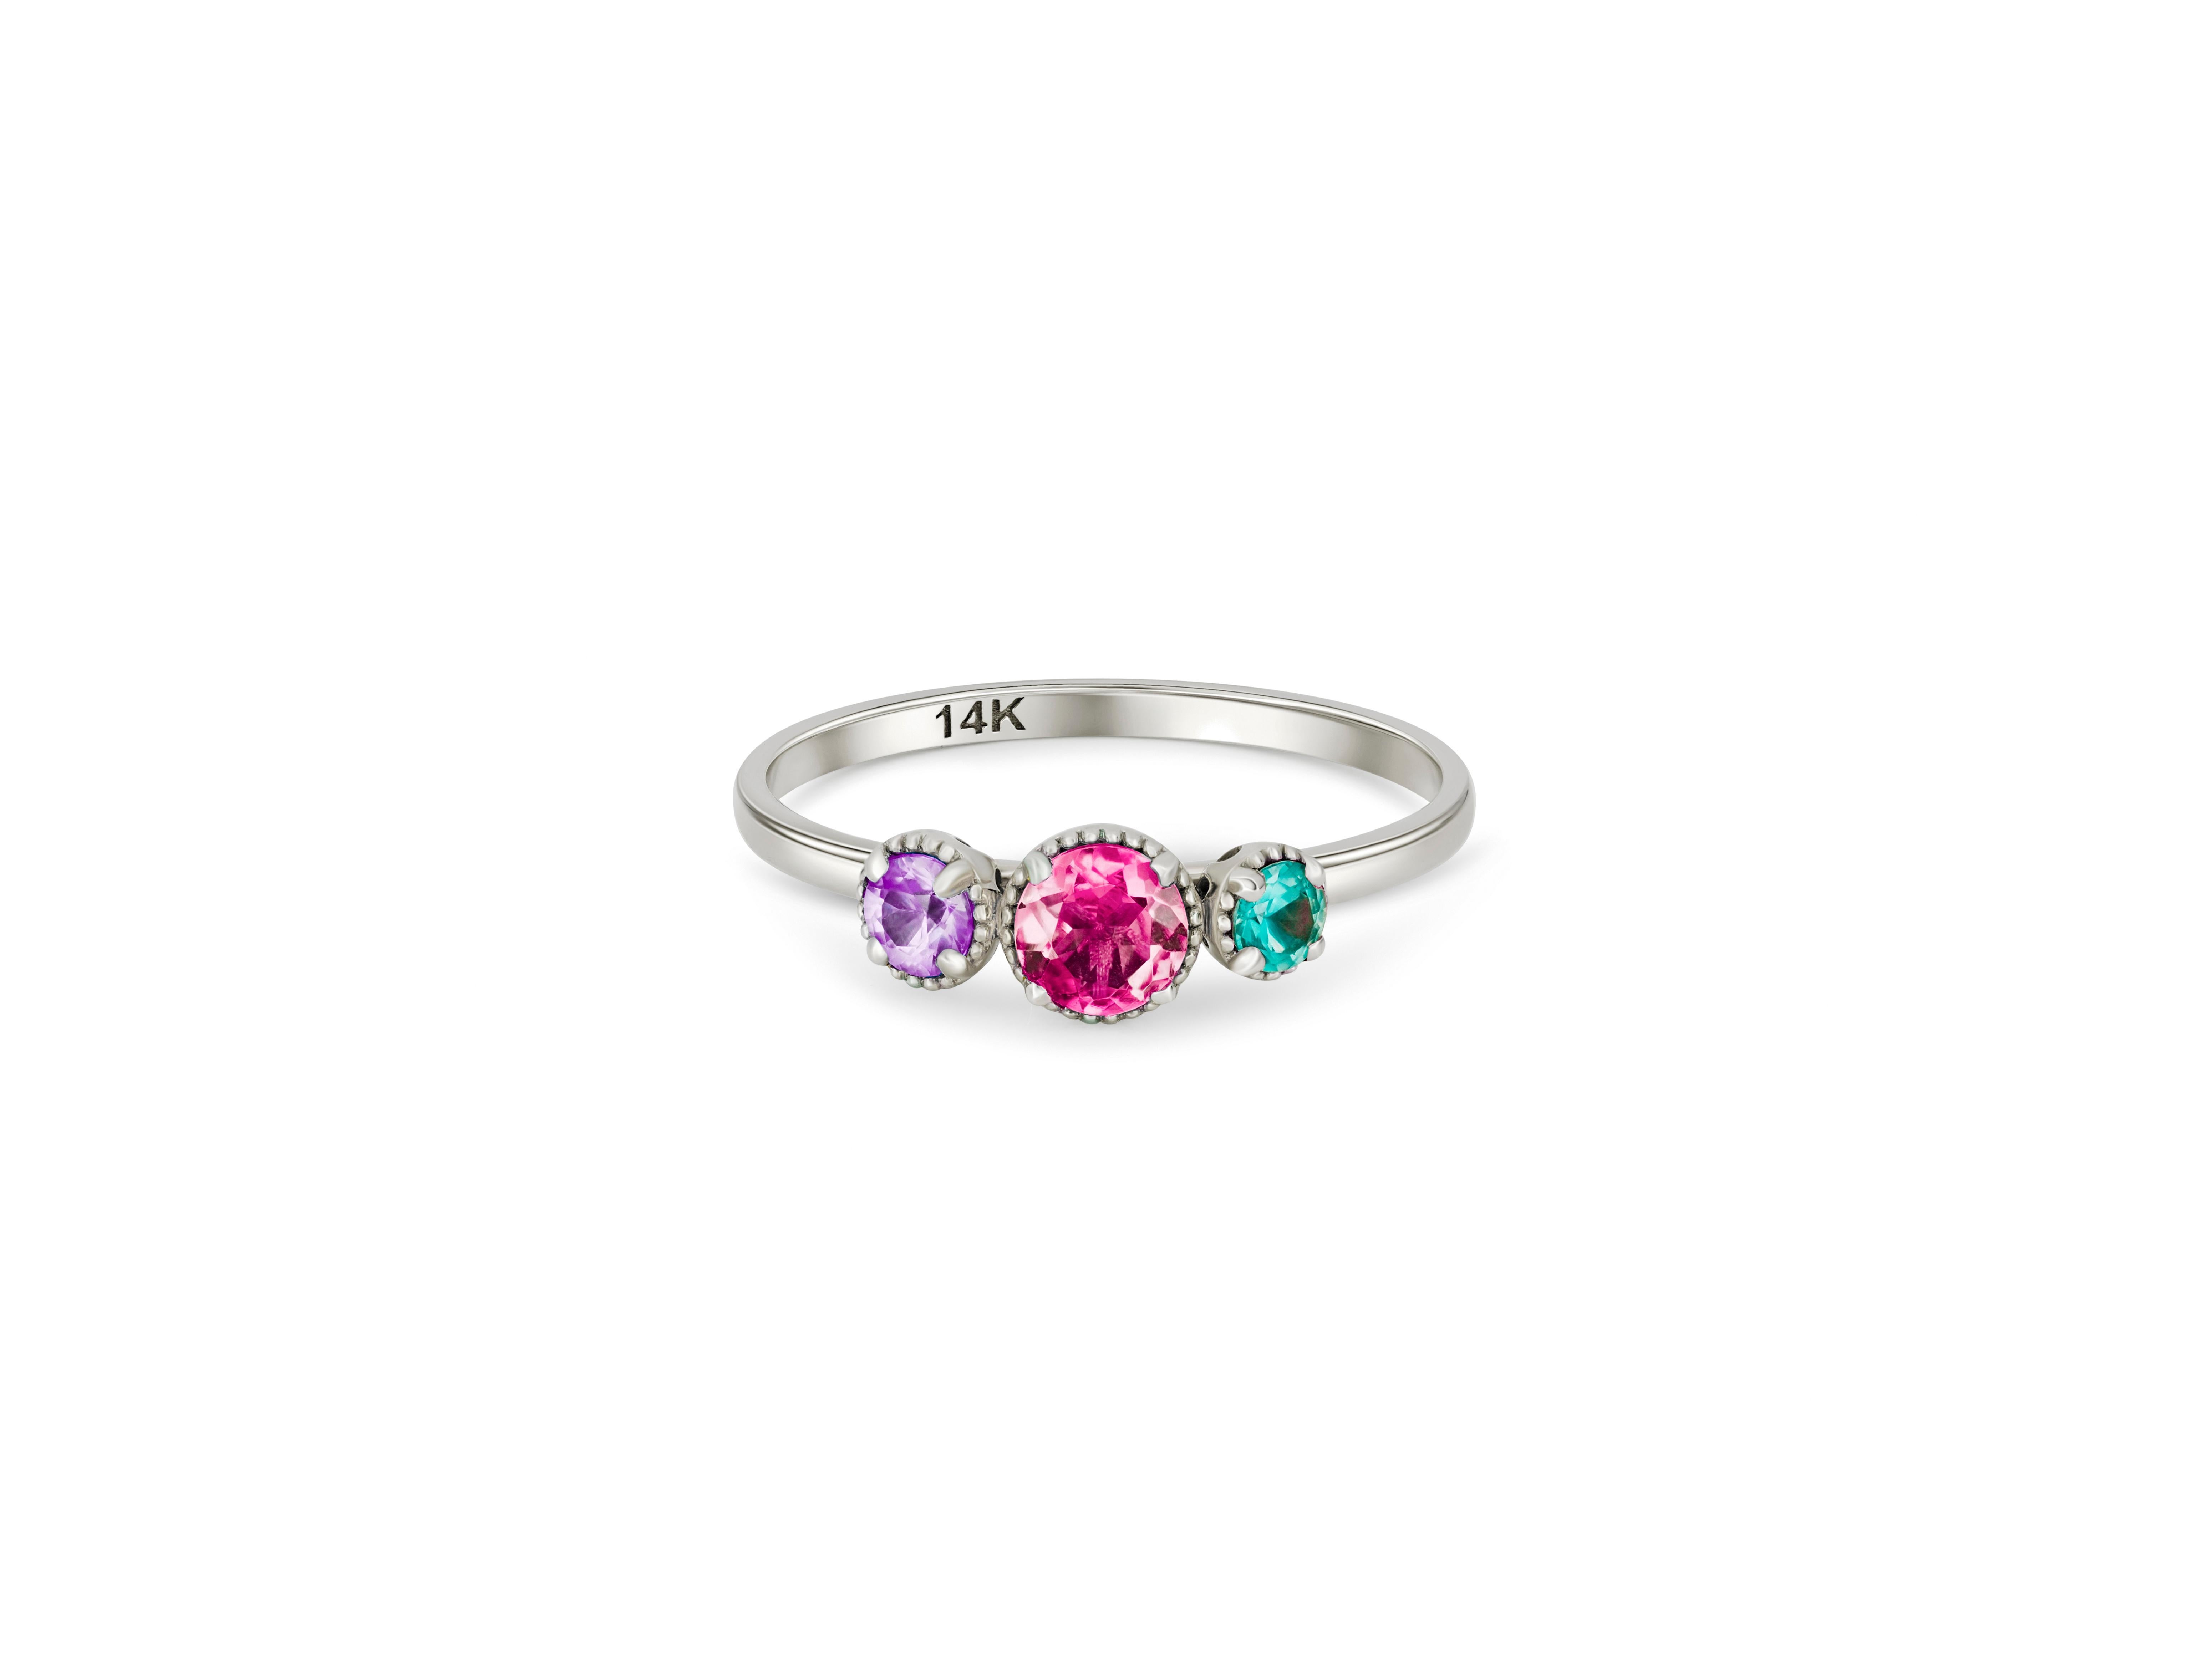 Trio gems 14k gold ring.
3 gemstone palette 14k gold ring.  Amethyst, ruby, paraiba 14k gold ring.  Color contrast gold ring. Purple, pink and blue gemstone ring. 

Metal: 14k gold
Weight: 1.8 gr depends from size

Gemstones:
Purple: lab amethyst,